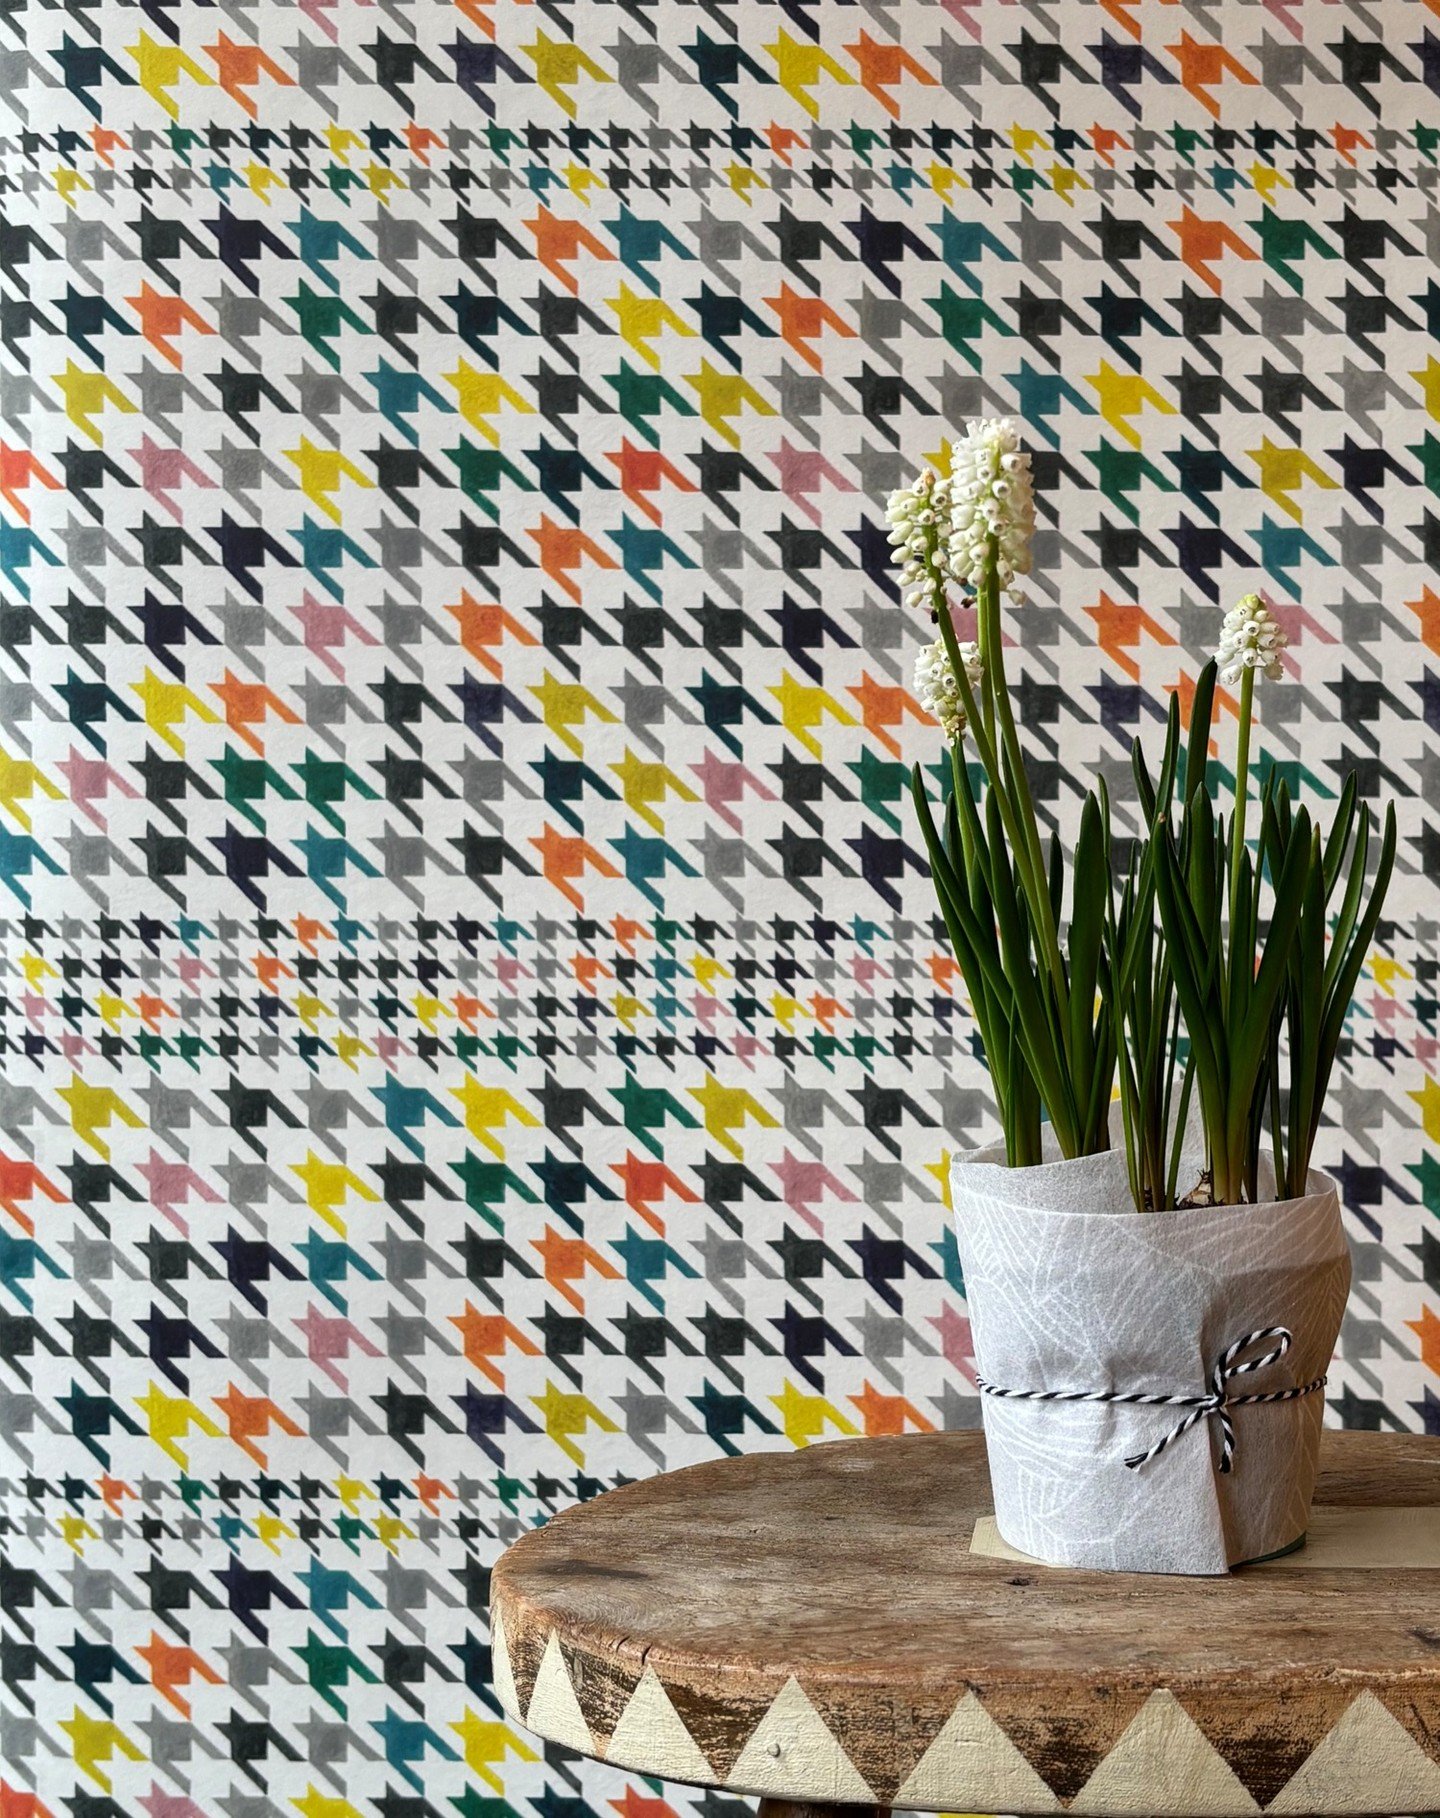 It's finally here! Introducing 'Derby', our newest wallpaper, for today's #wallpaperwednesday post!

Derby comes in two dazzling colourways, 'Palomino' (first slide) and 'Dapple Grey' (second slide). Did you know that Yukari originally hand painted e